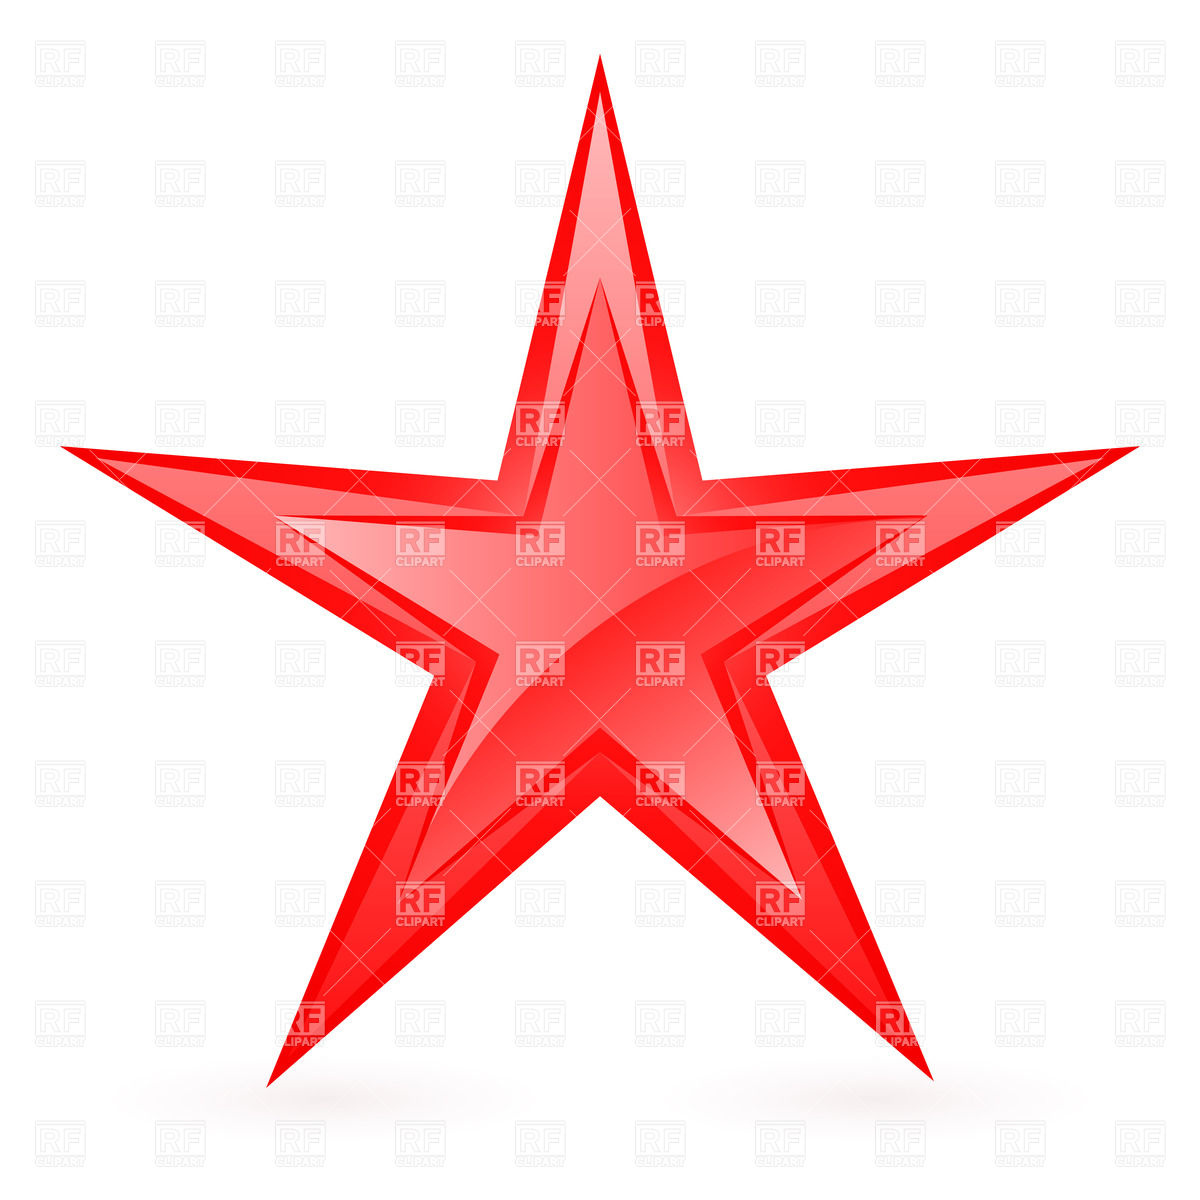 Related Pictures Red Star Clip Art Image Red Star Clip Art Image In